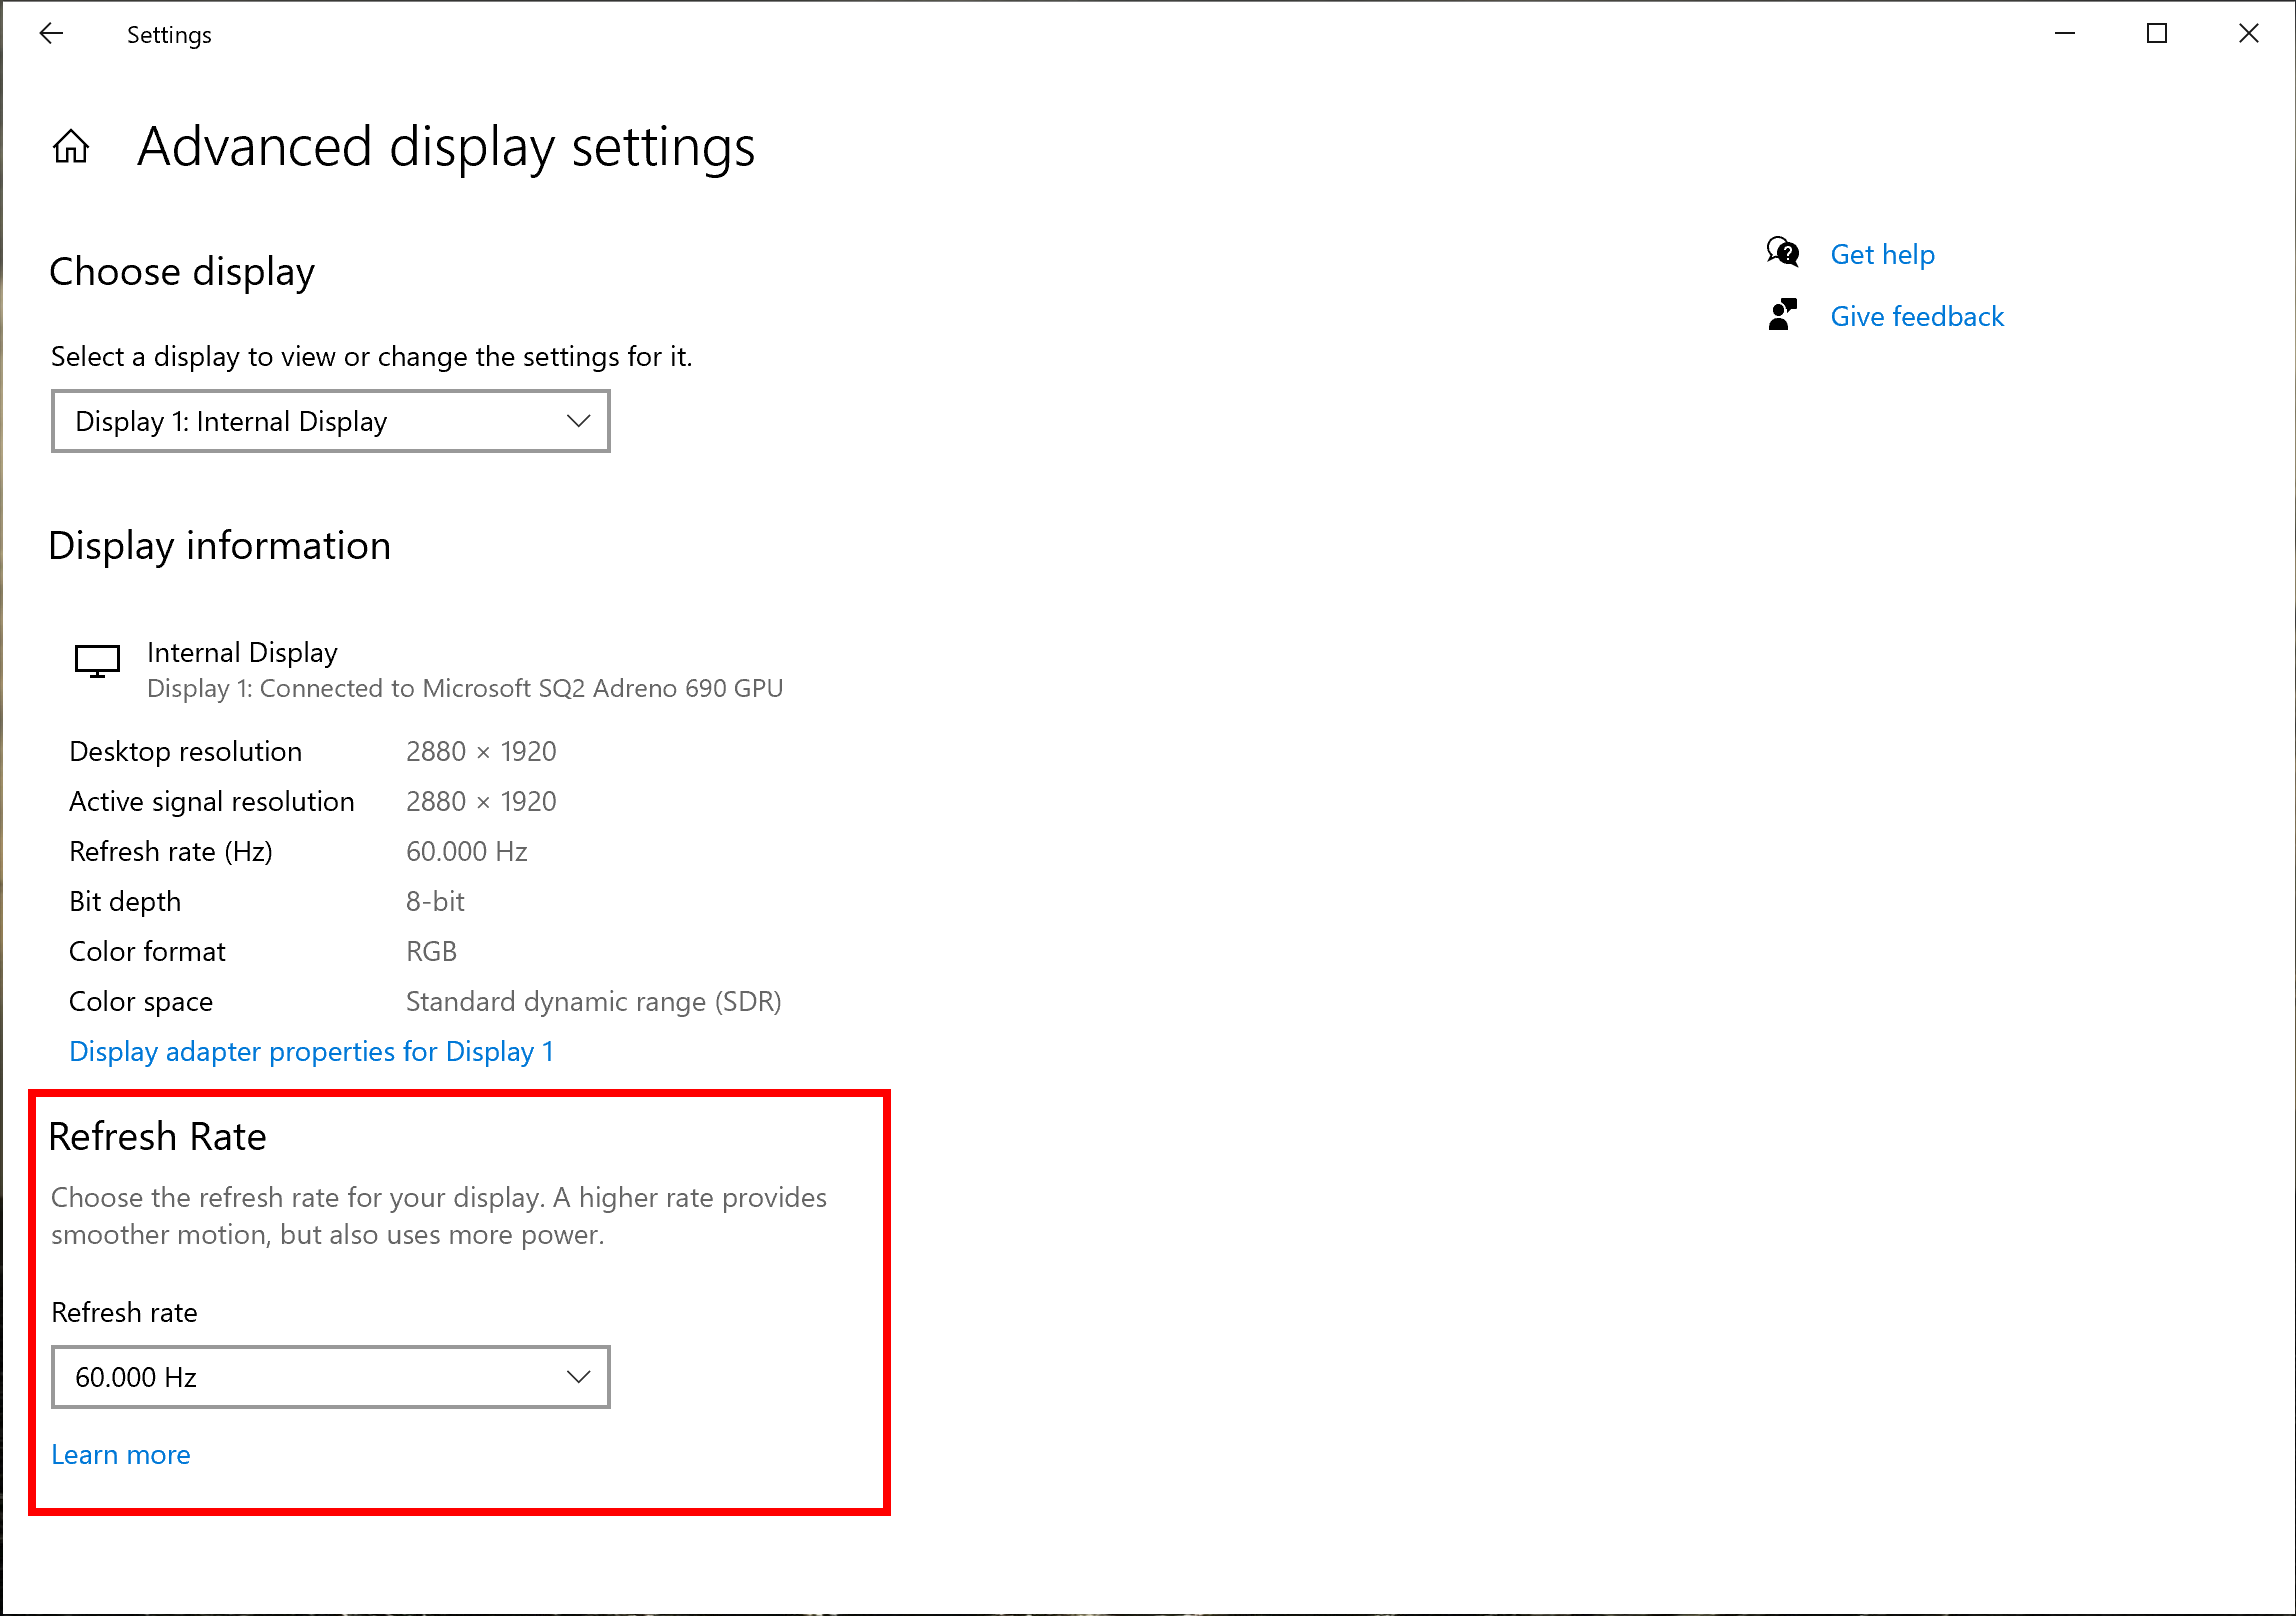 Showing the new refresh rate dropdown in Advanced Display Settings.